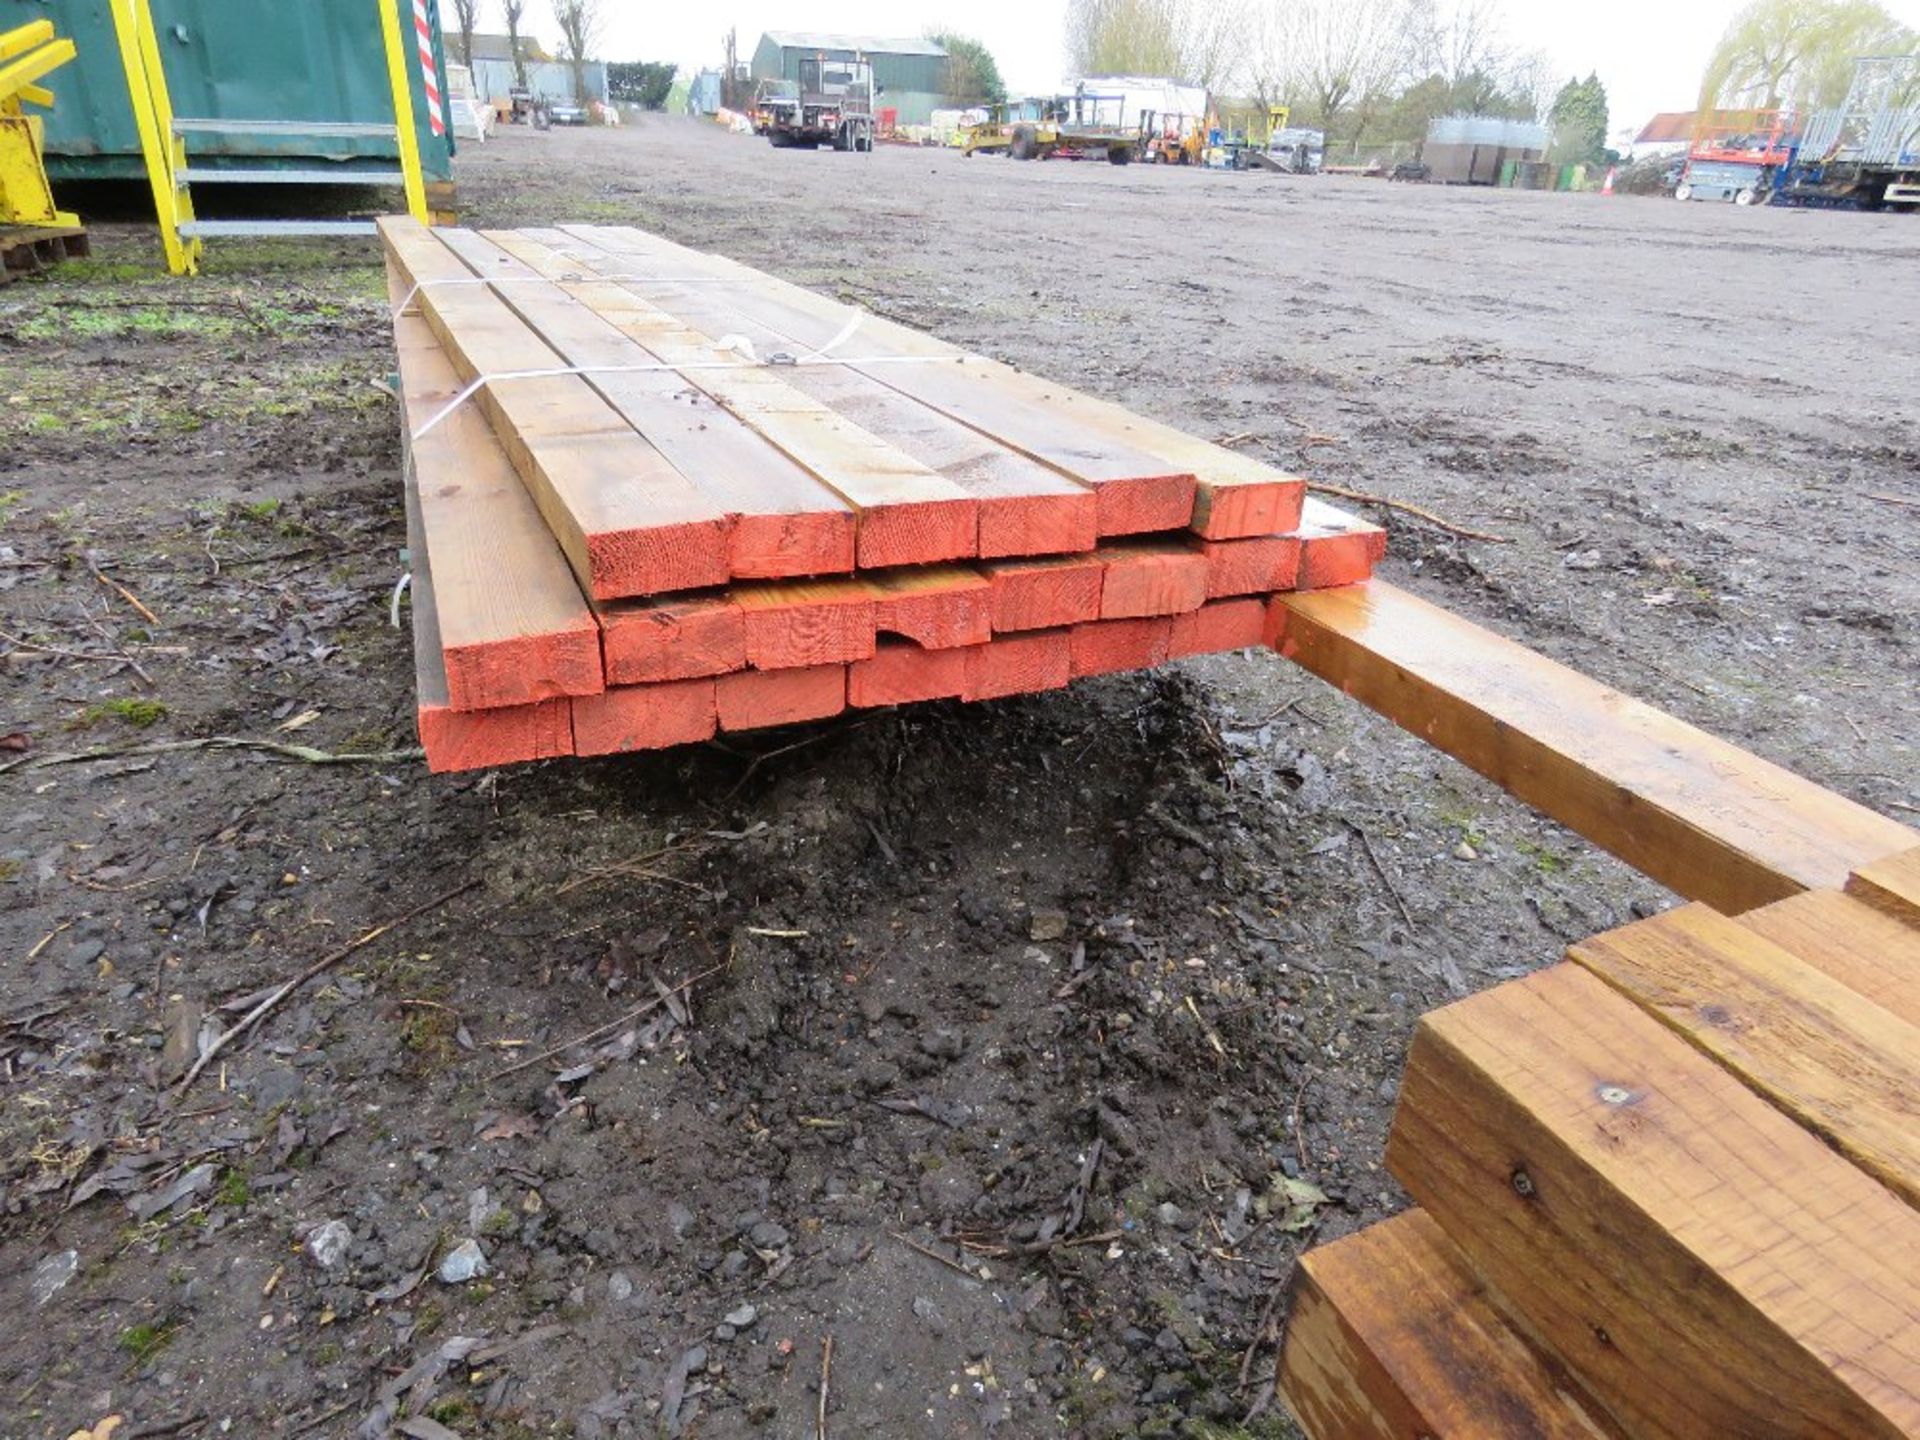 BUNDLE OF 4 X 2 CONSTRUCTION TIMBERS, 9-12FT LENGTH APPROX. THIS LOT IS SOLD UNDER THE AUCTIONEER - Image 3 of 3